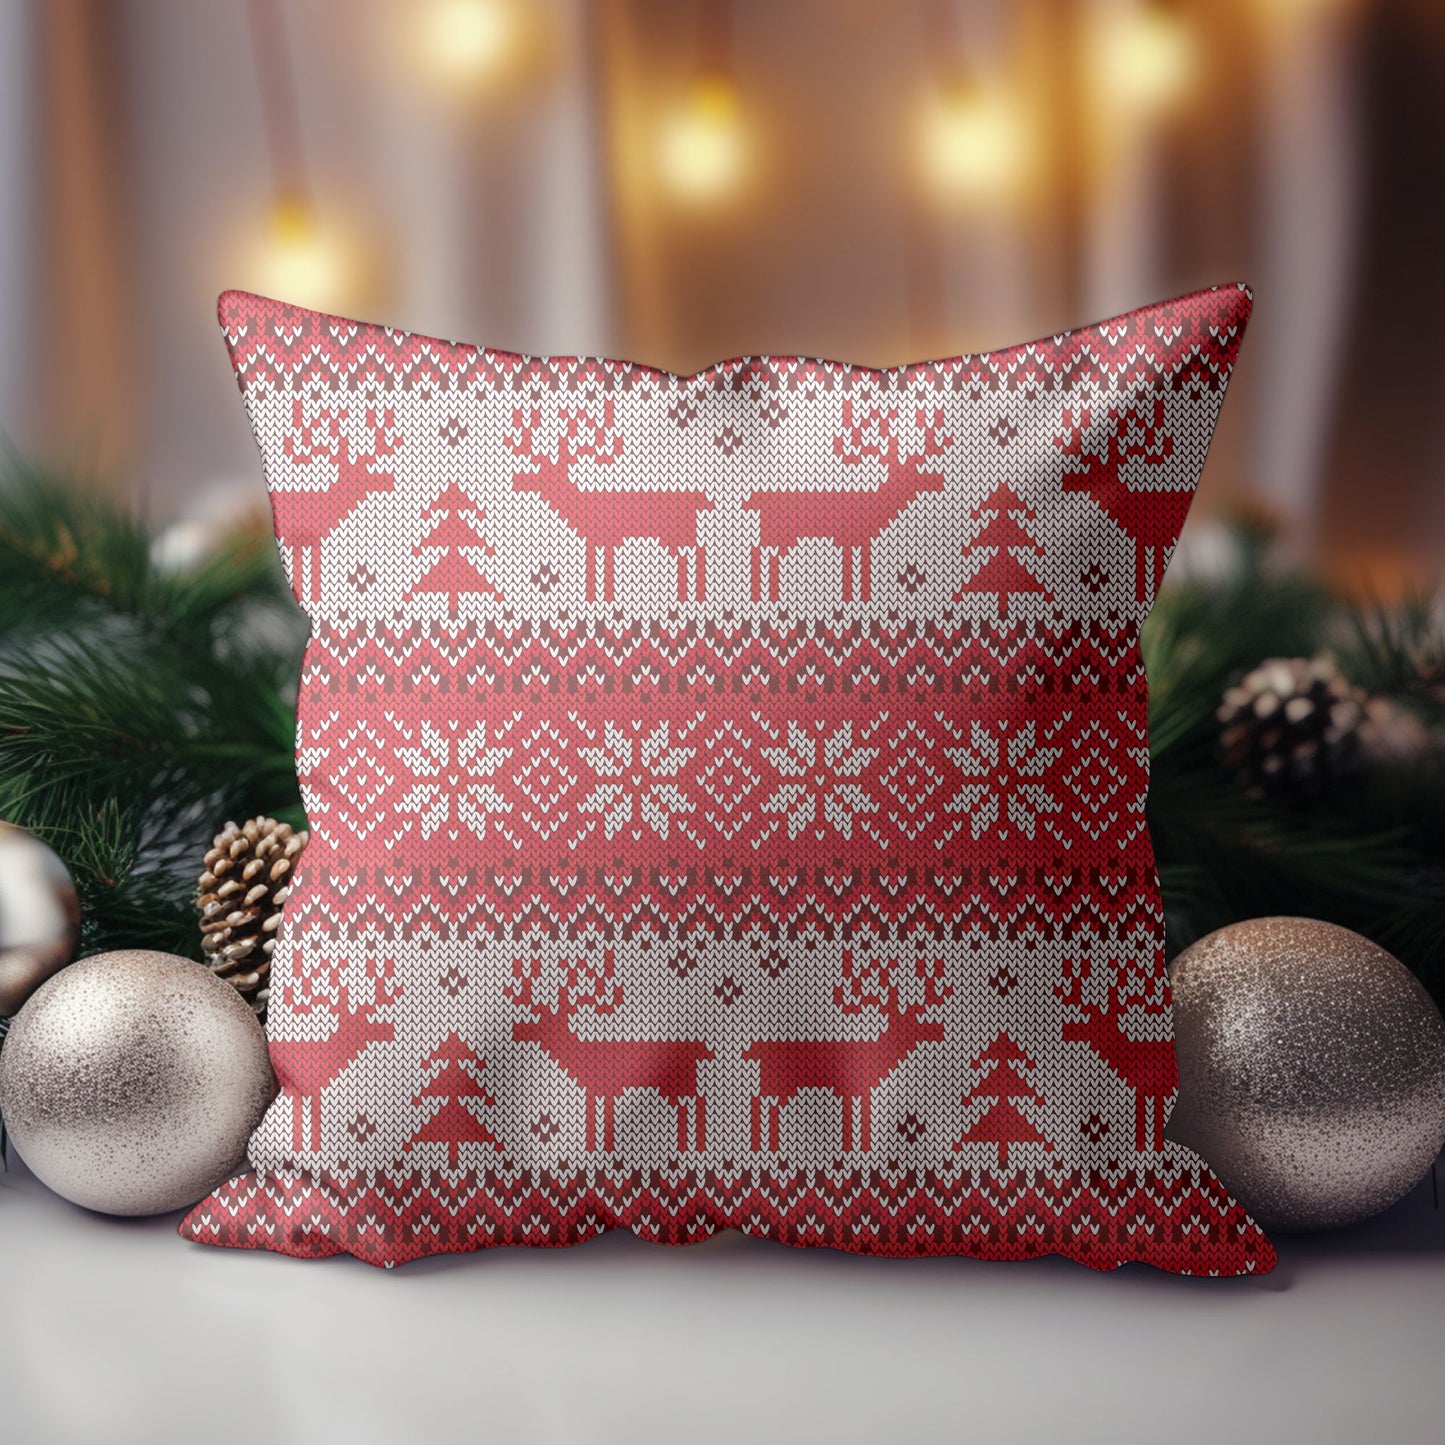 Festive Christmas Pillow with Red Reindeer Design